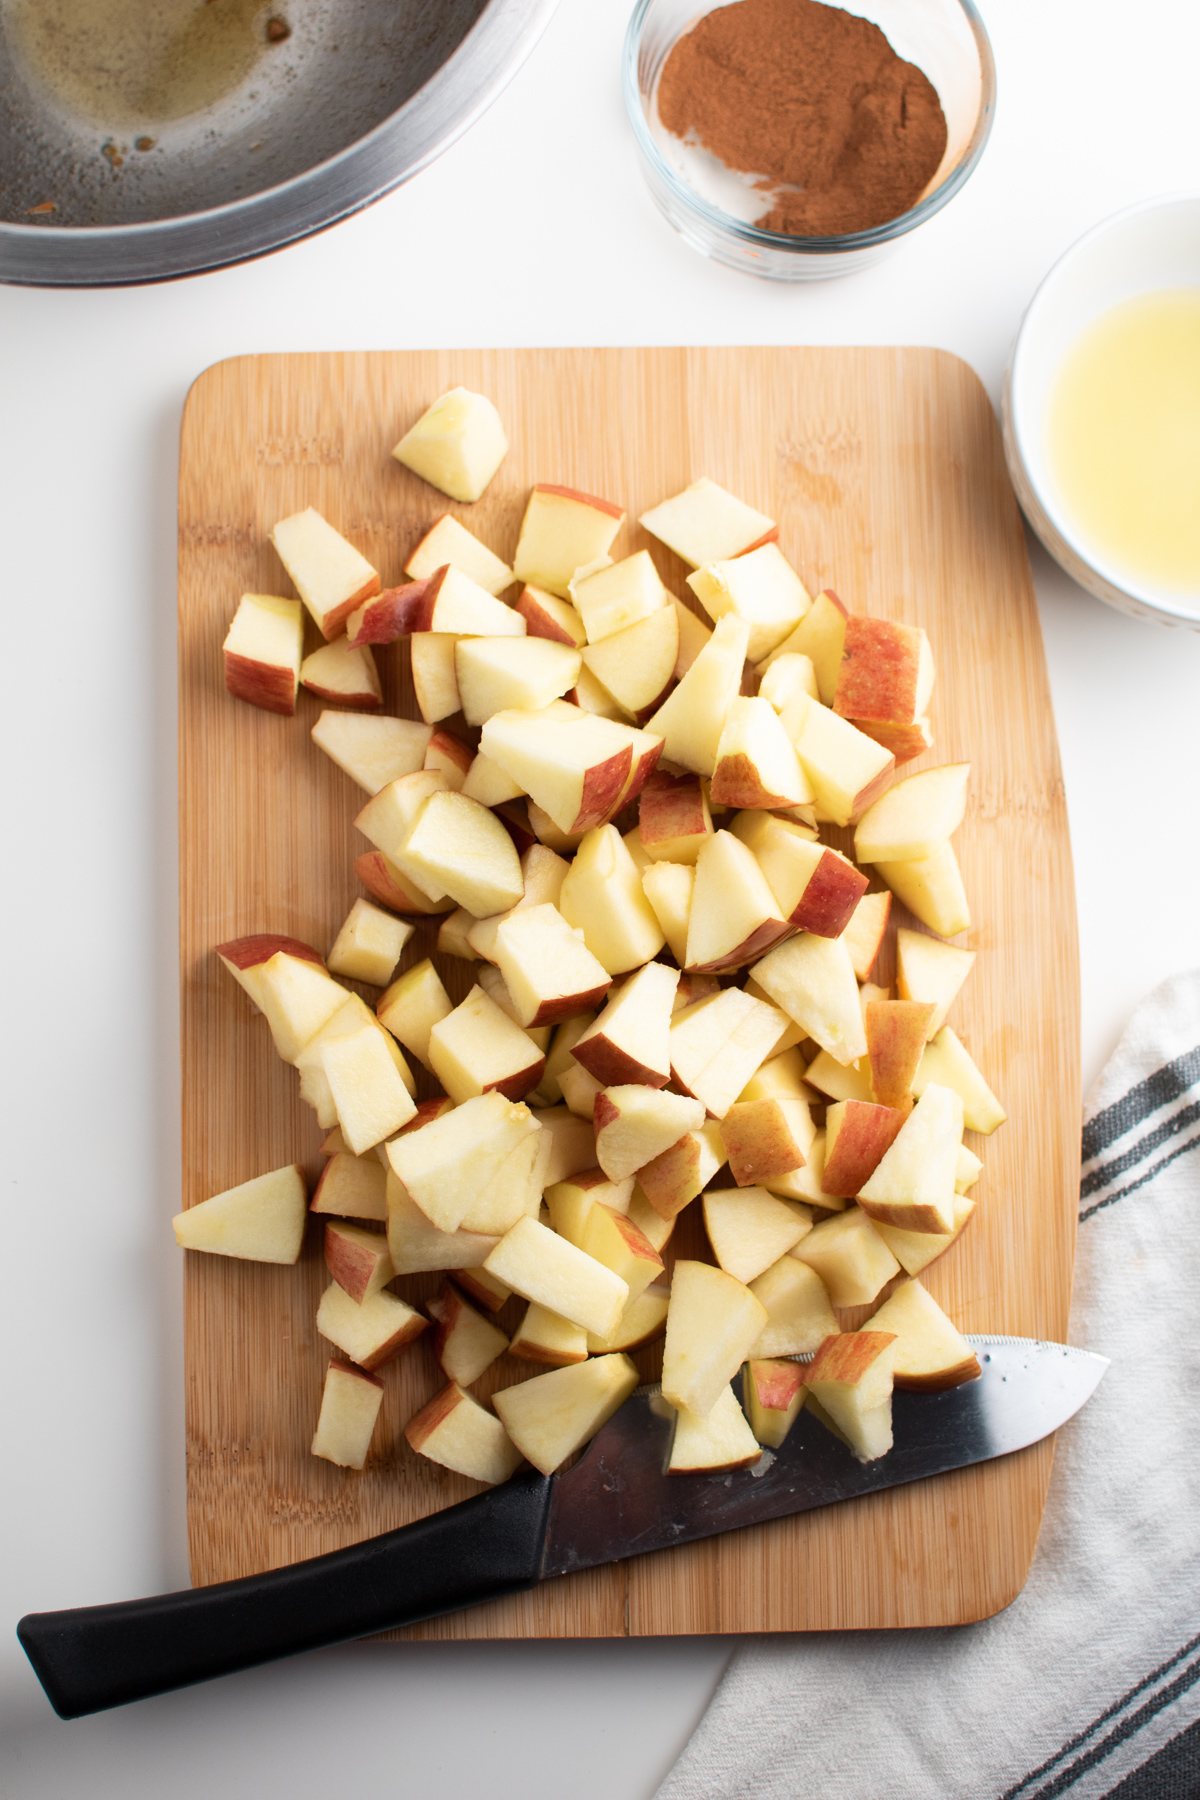 Chopped apples on wood cutting board surrounded by knife and bowls of ingredients.